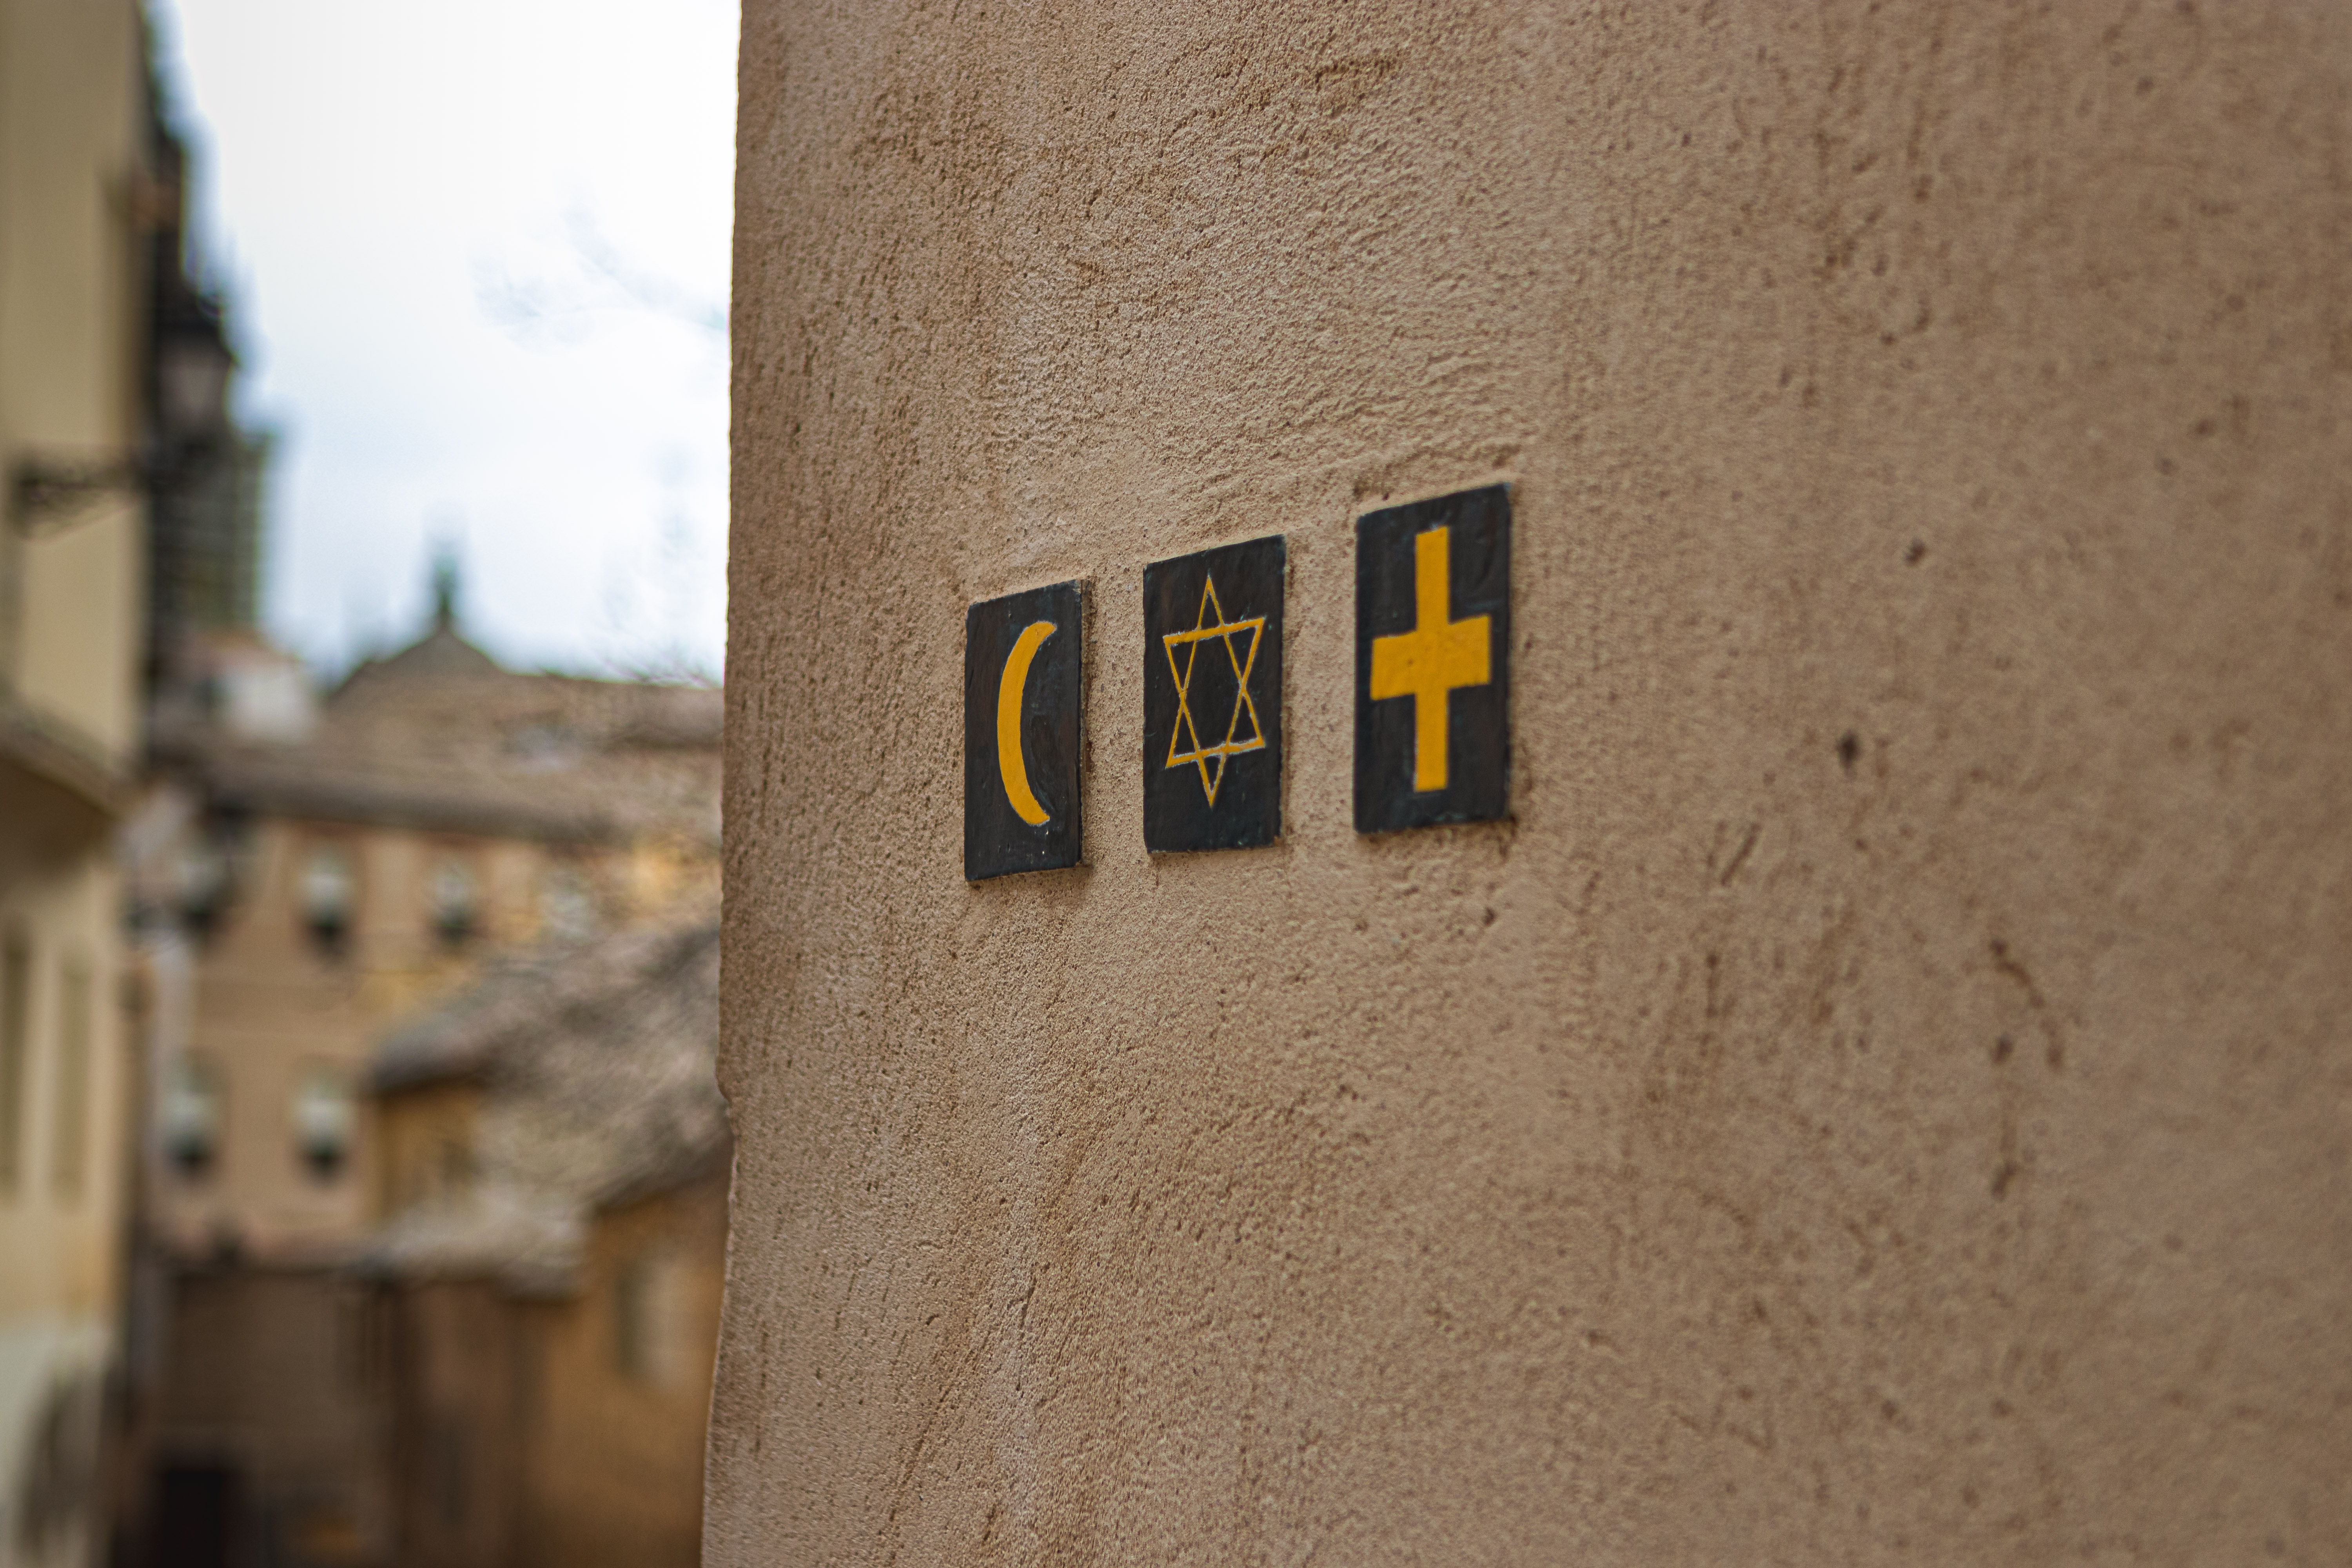 The Spirit of God is "one" and makes us "one." The three religions present in the place of conflict (Judaism, Christianity, Islam) are the religions of the "book." (Photo: Unsplash)